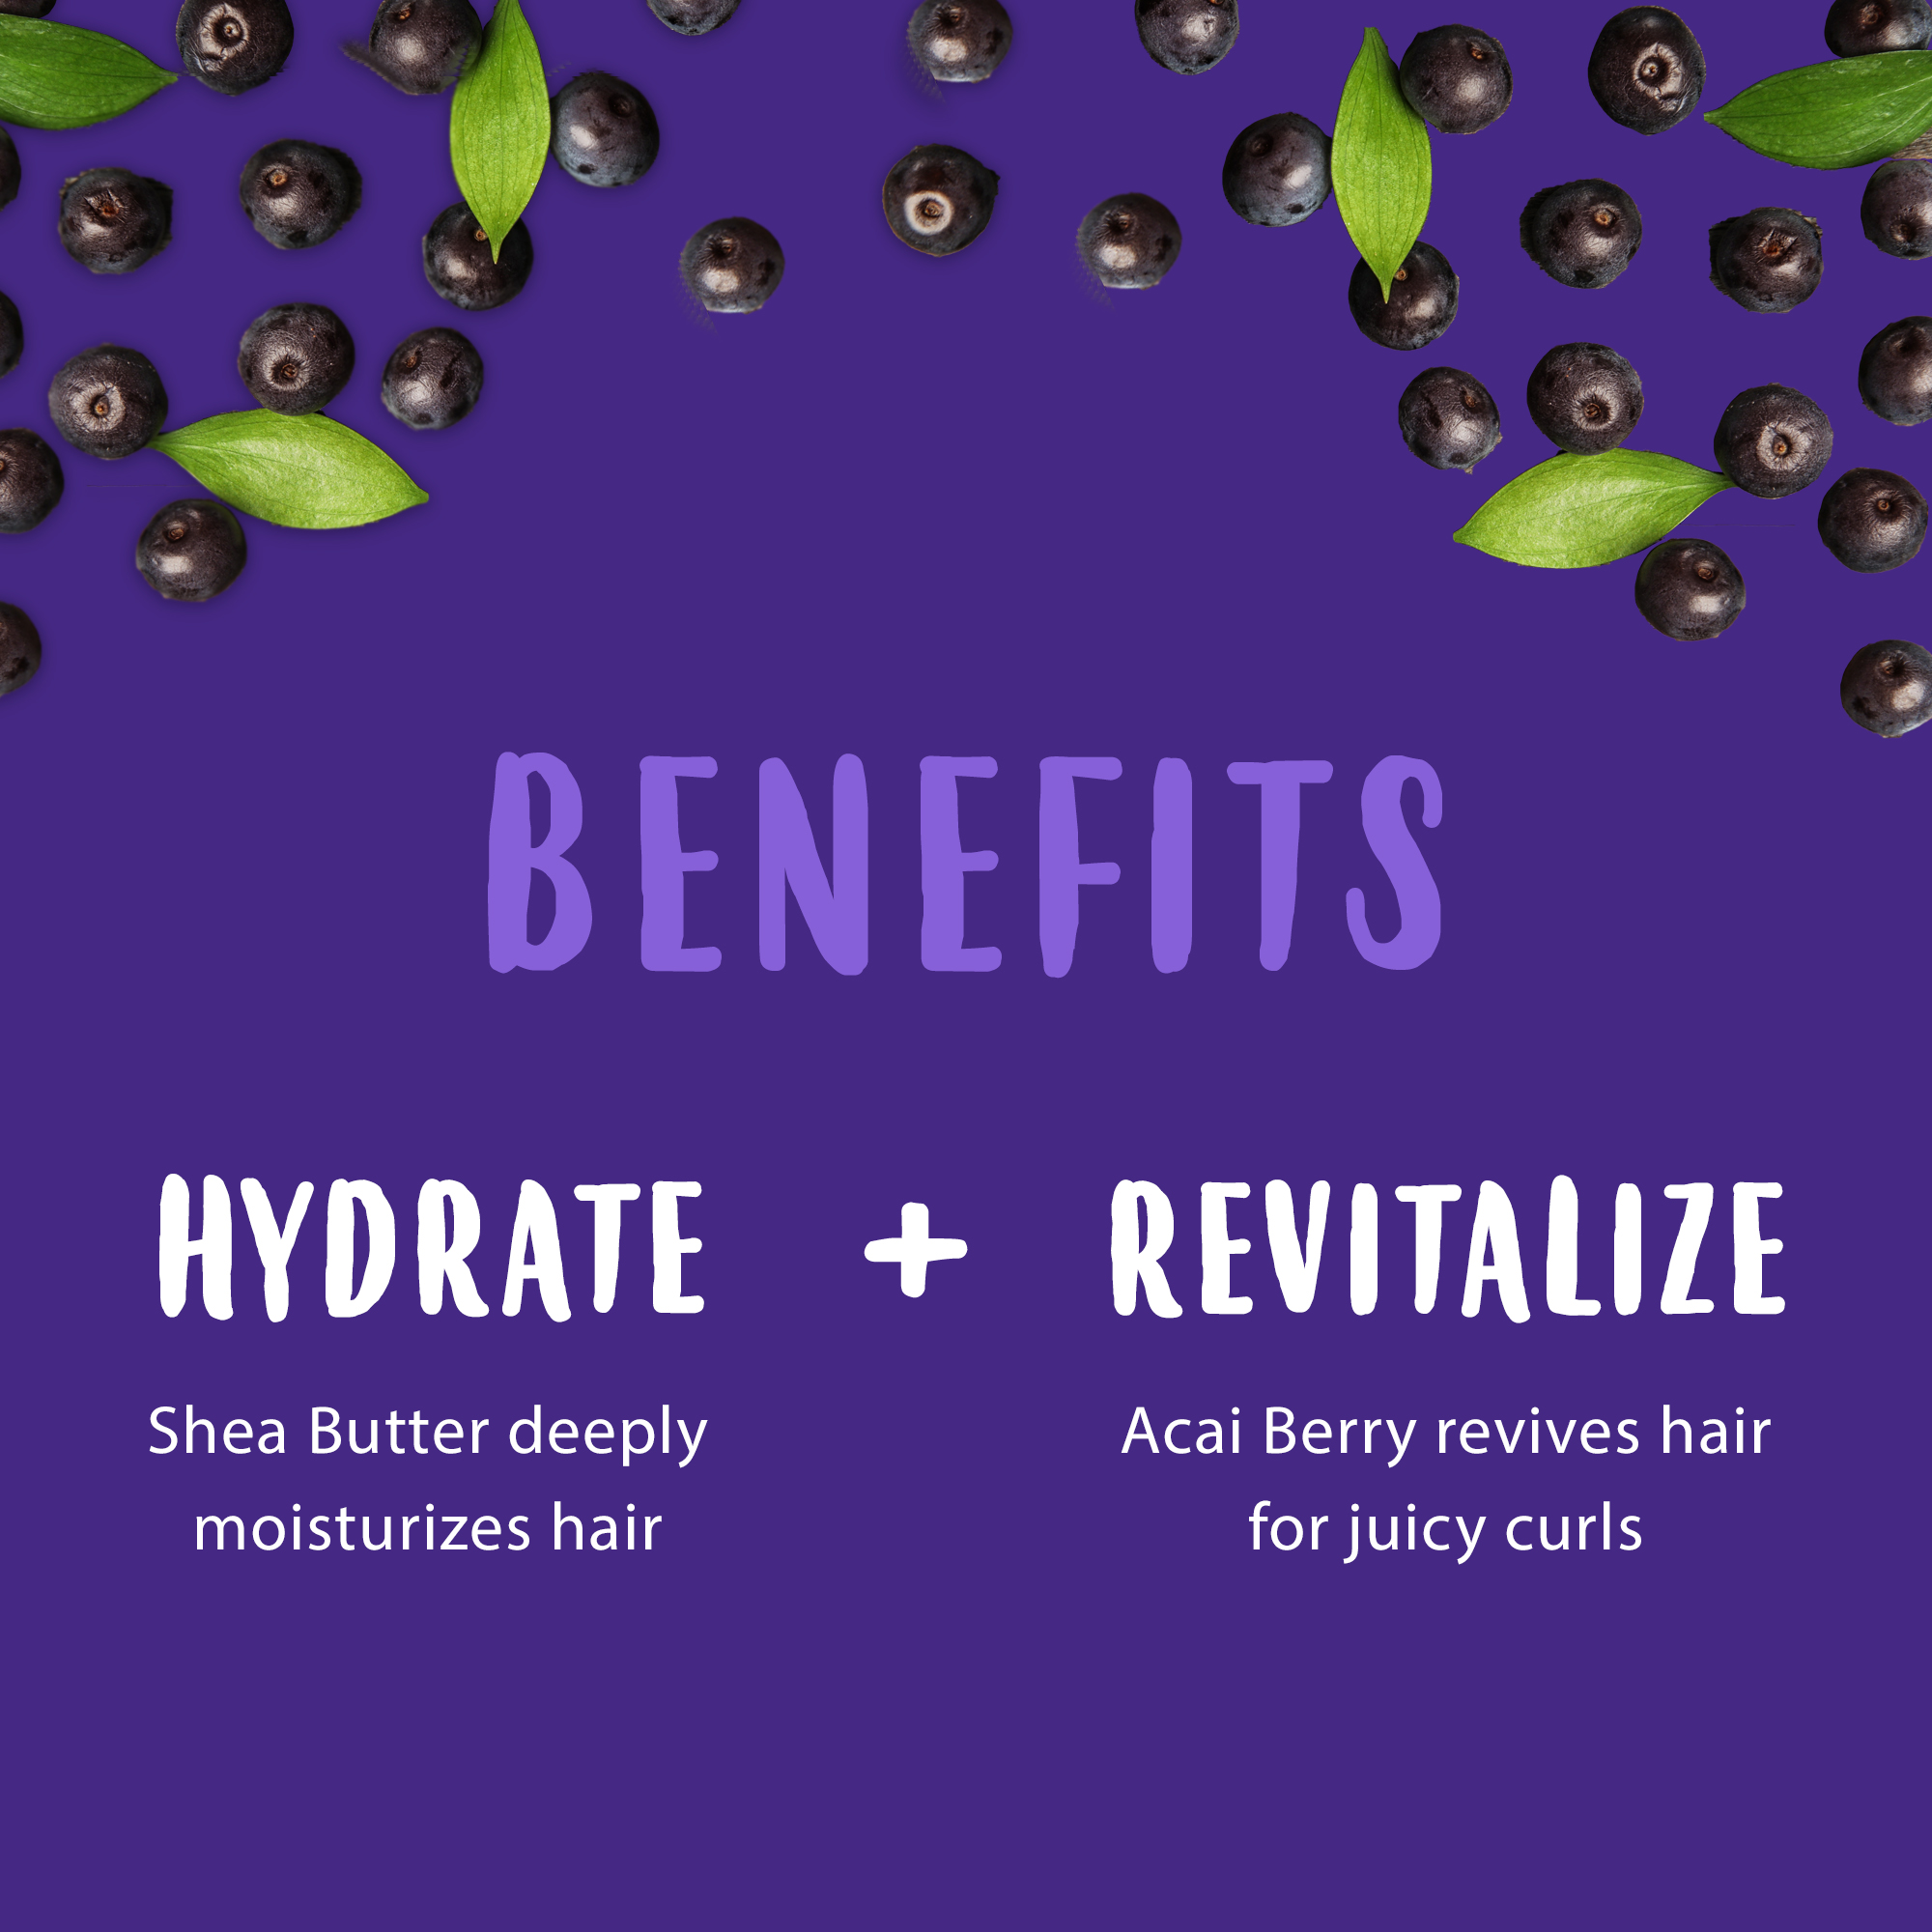 Cantu Revitalizing Shampoo with Acai Berry and Shea Butter, 13.5 fl oz. - image 4 of 9